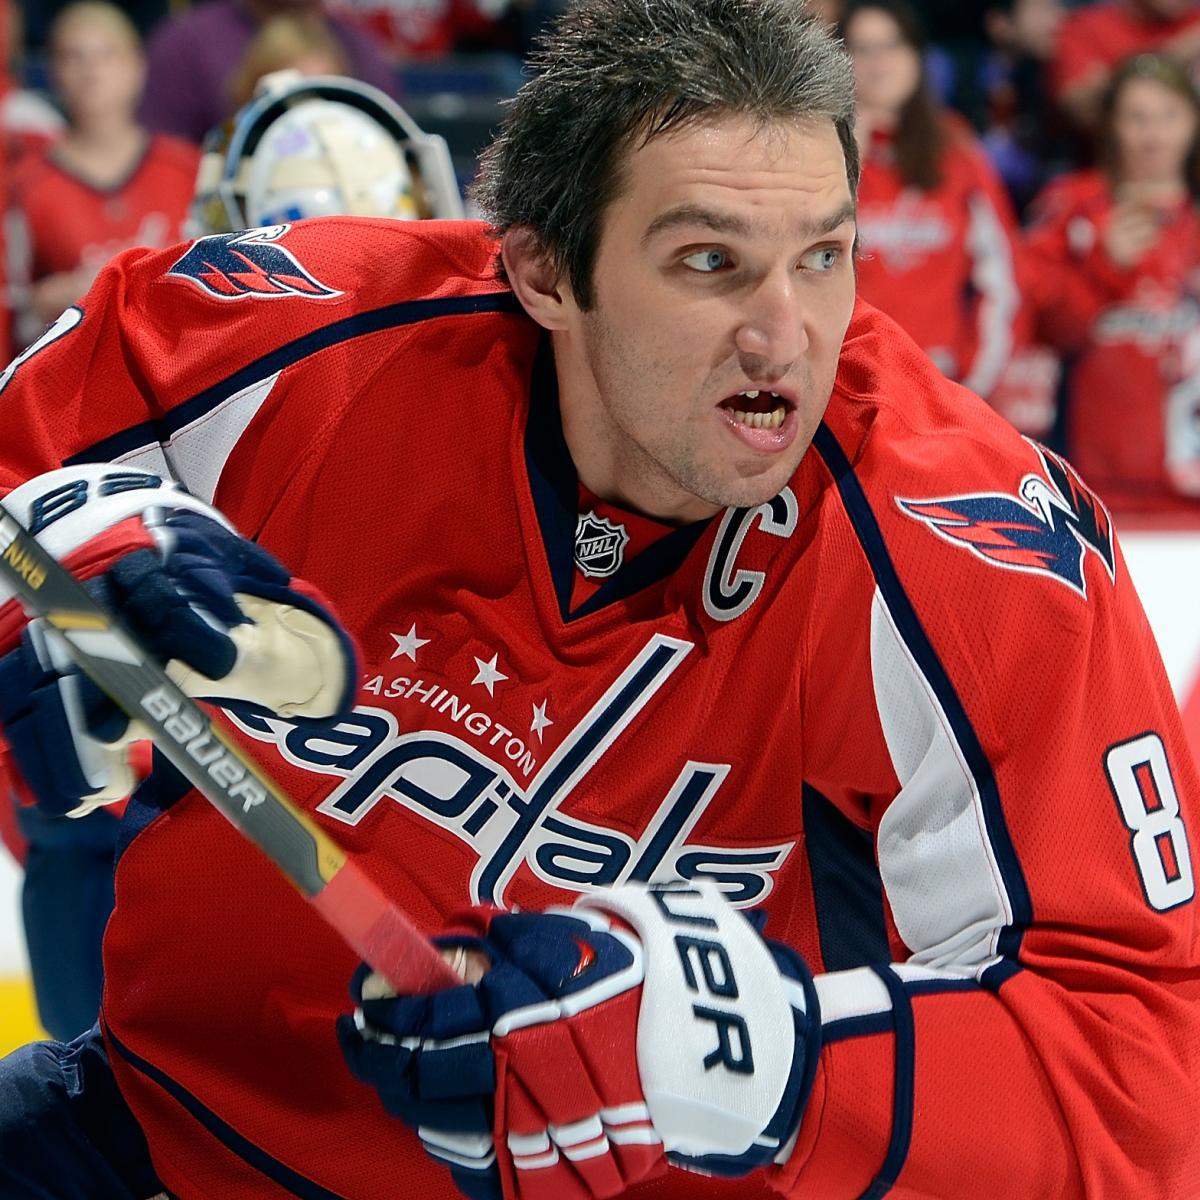 NHL Star Power Index: Alex Ovechkin on pace for career year